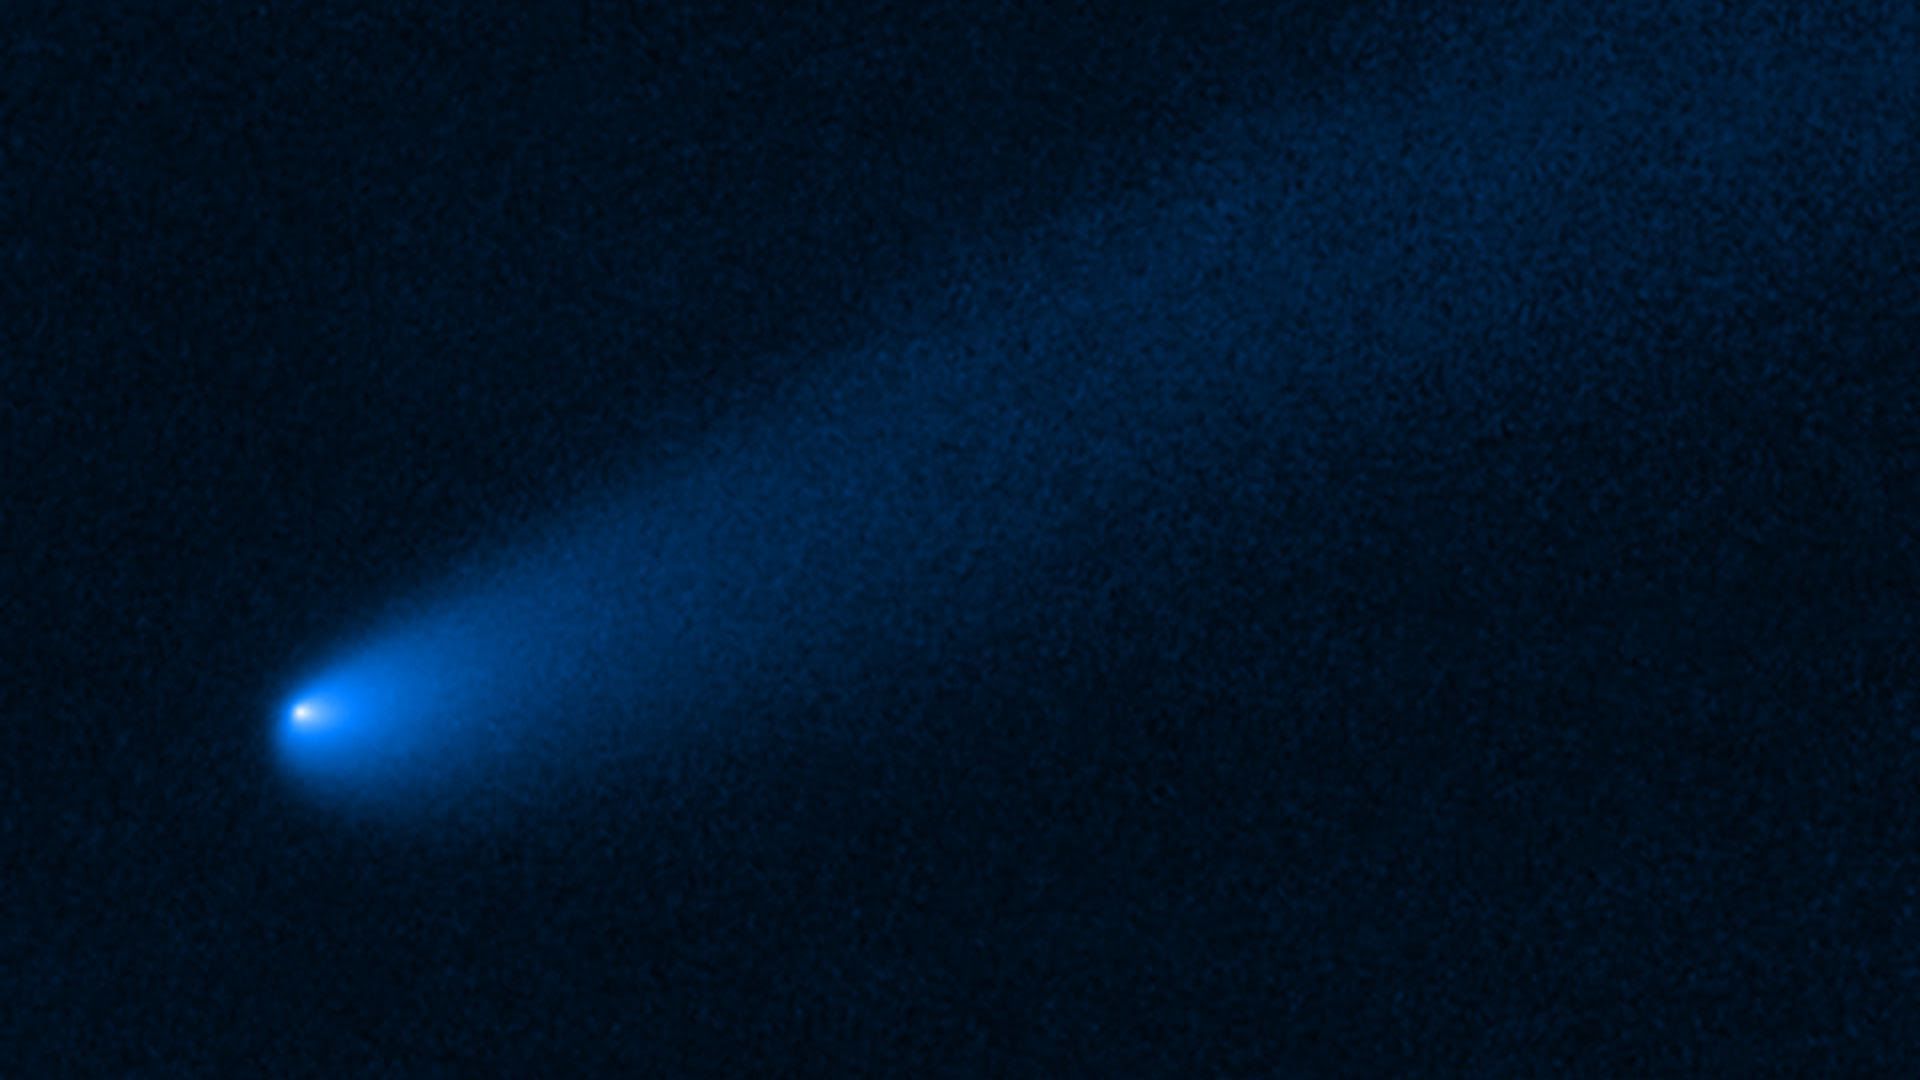 The comet as seen by the Hubble Space Telescope. Photo: NASA/ESA/ B. Bolin